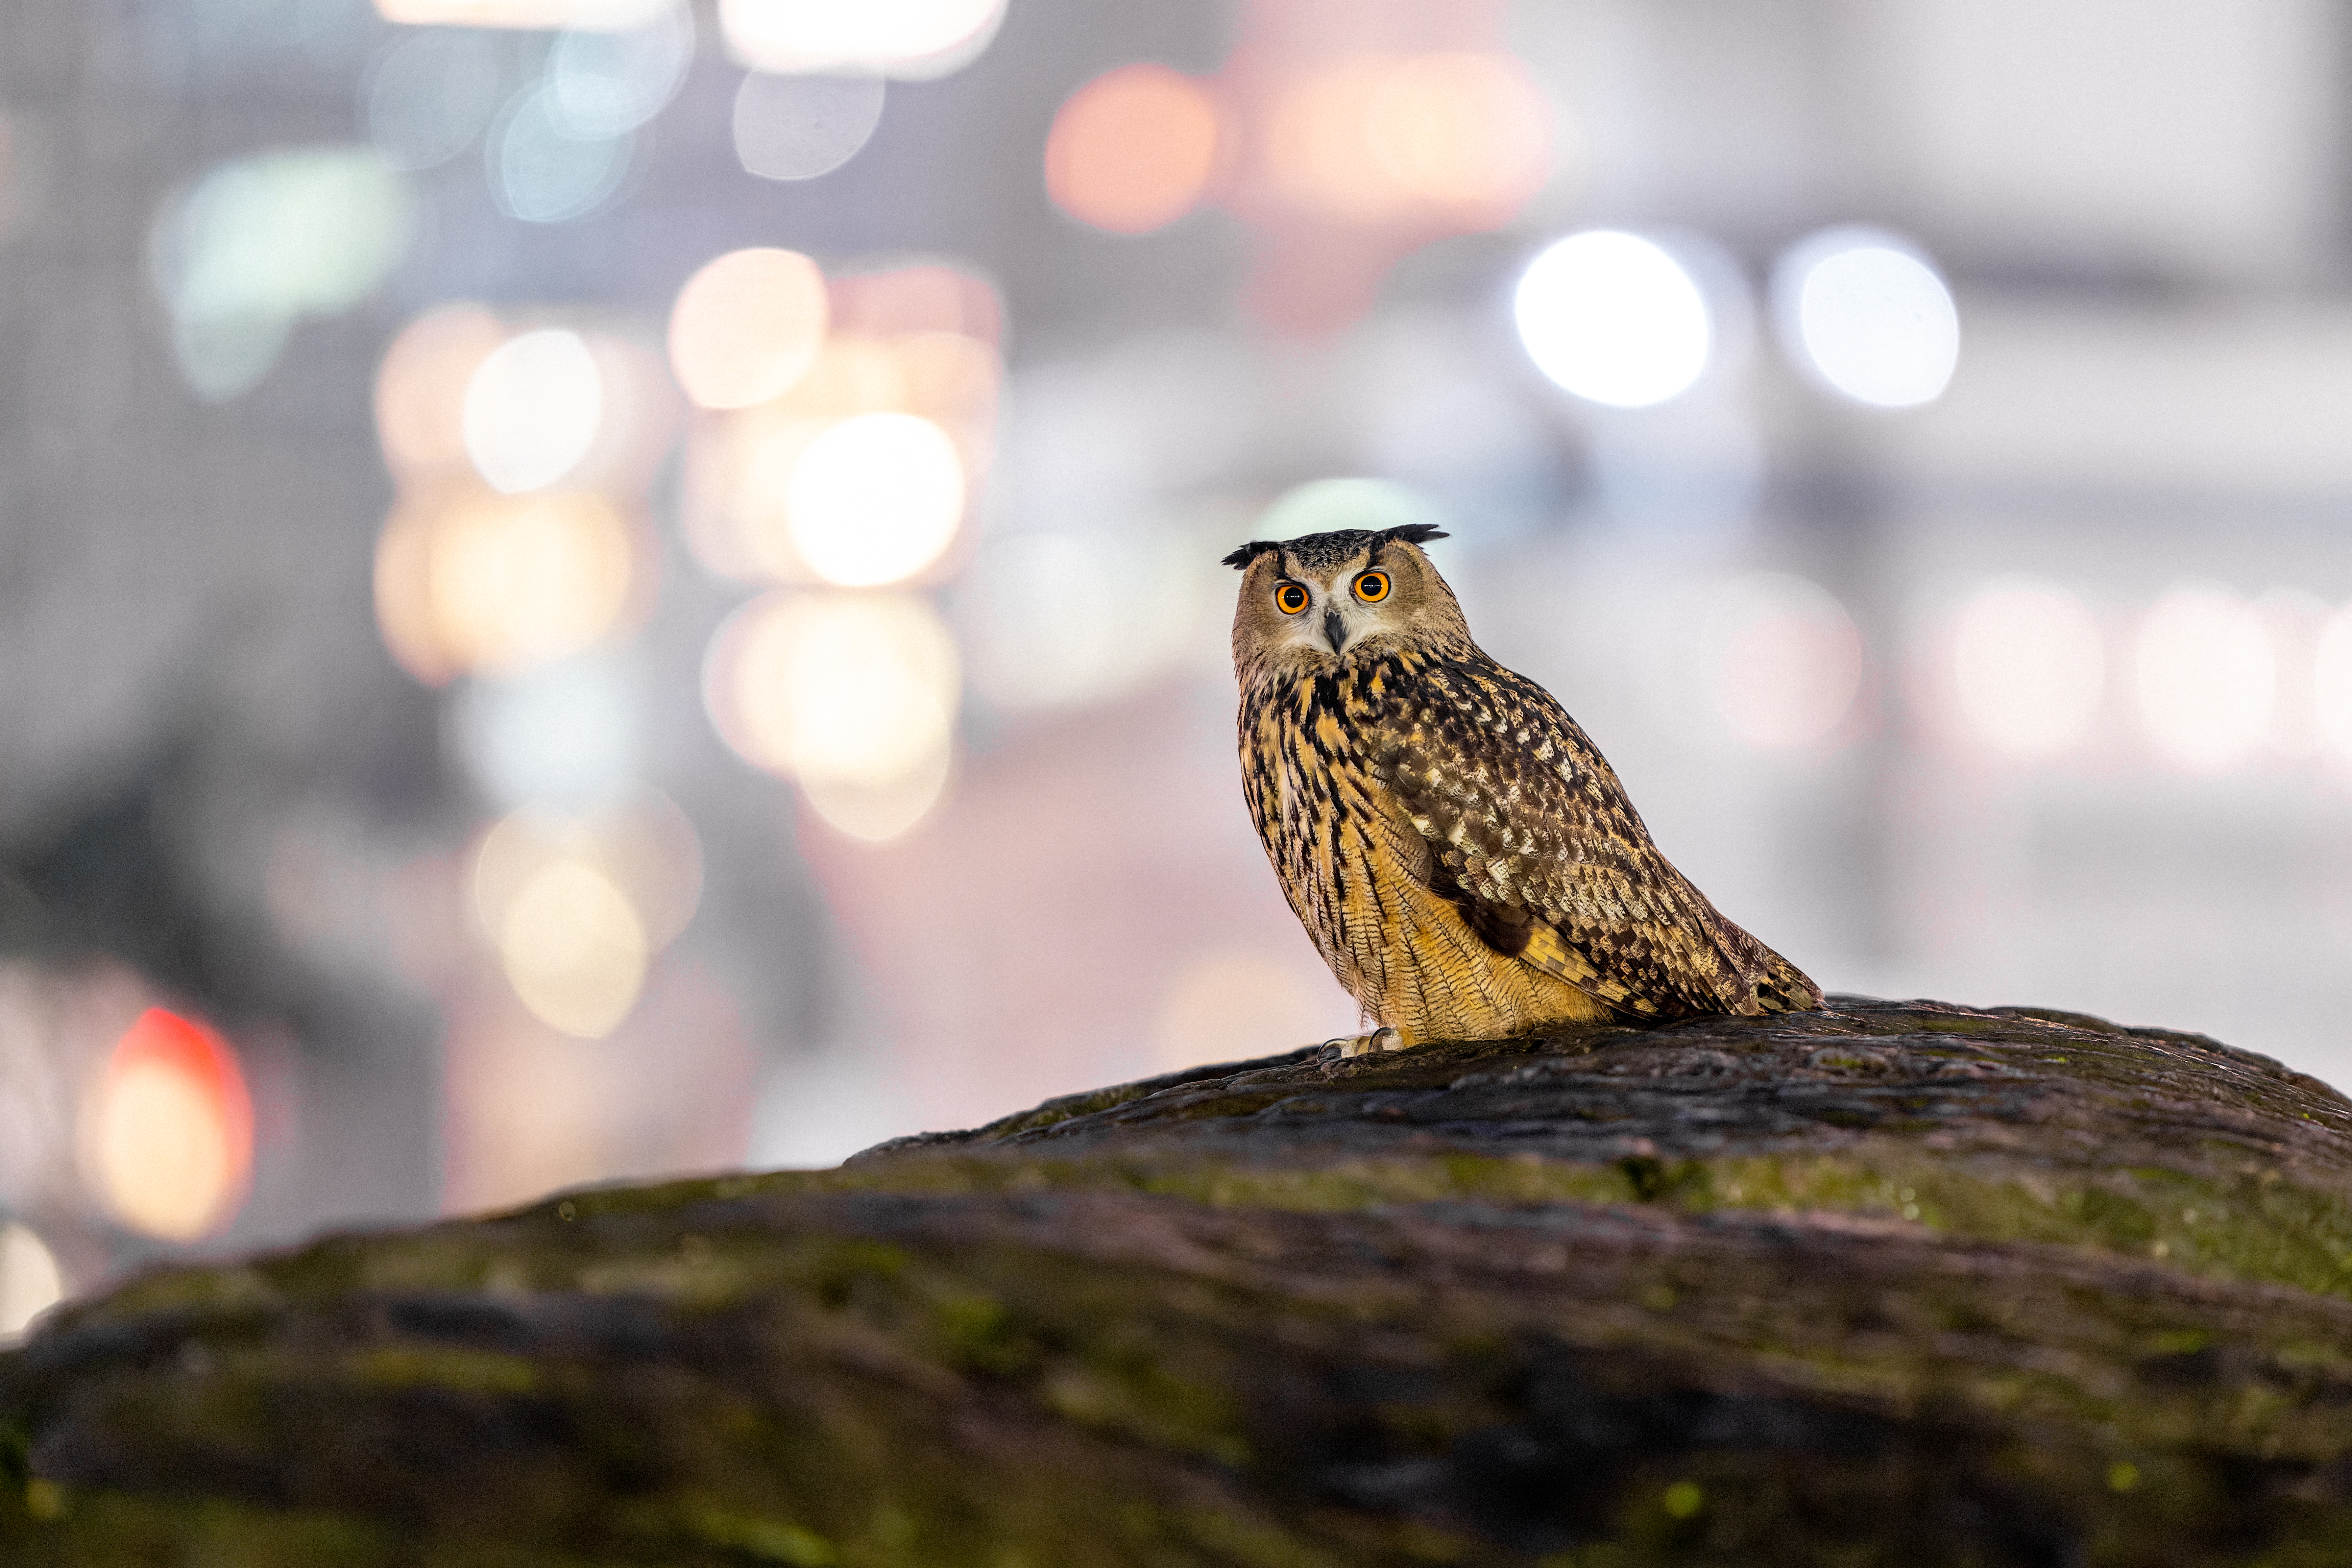 An owl pauses on a rock in Central Park